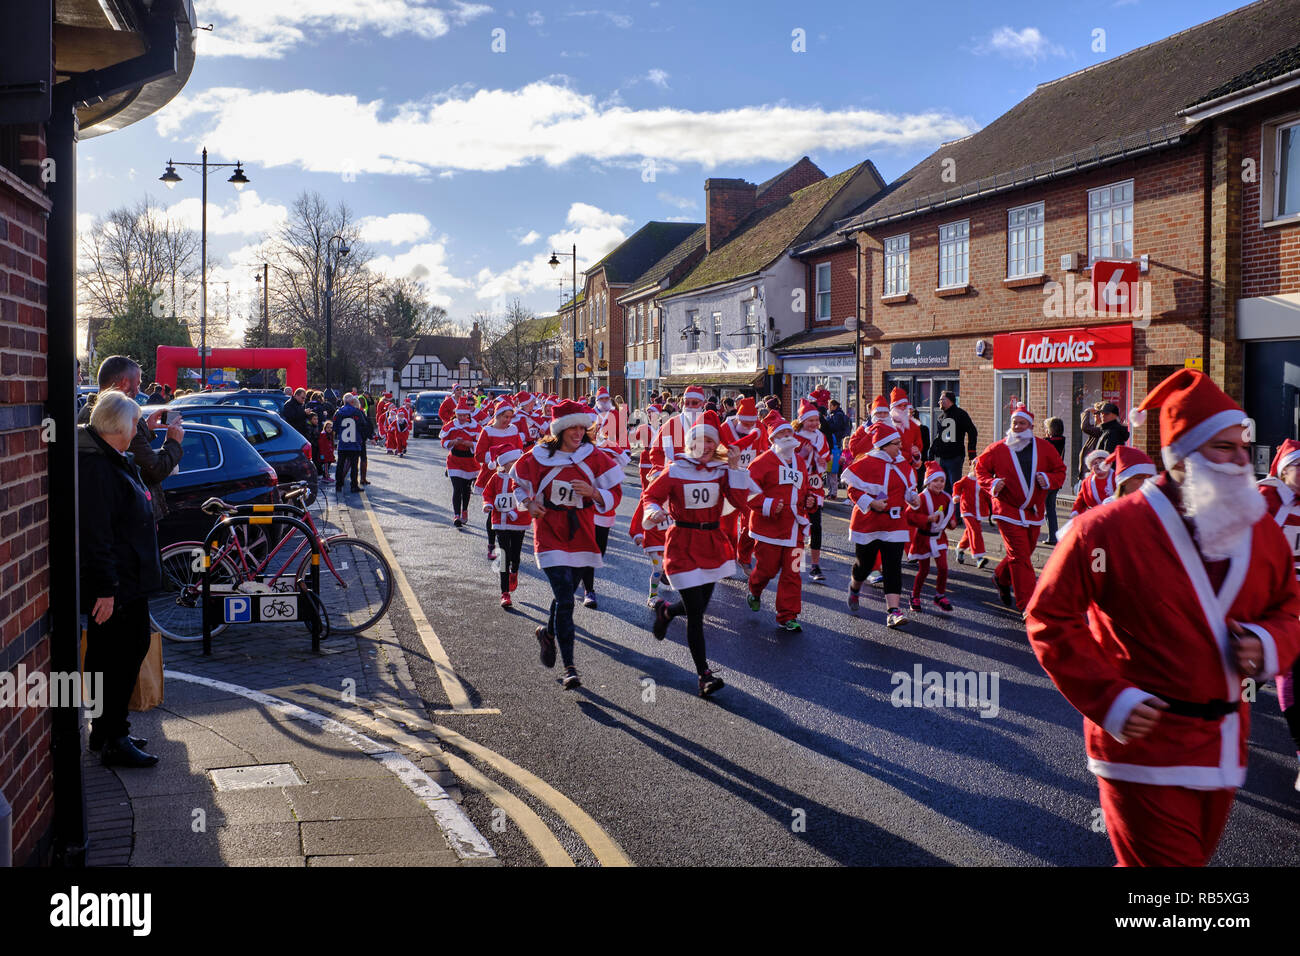 People dressed as Santa Claus who have just started taking part in the Great Thatcham Santa Fun Run in Thatcham high street while people watch on Stock Photo